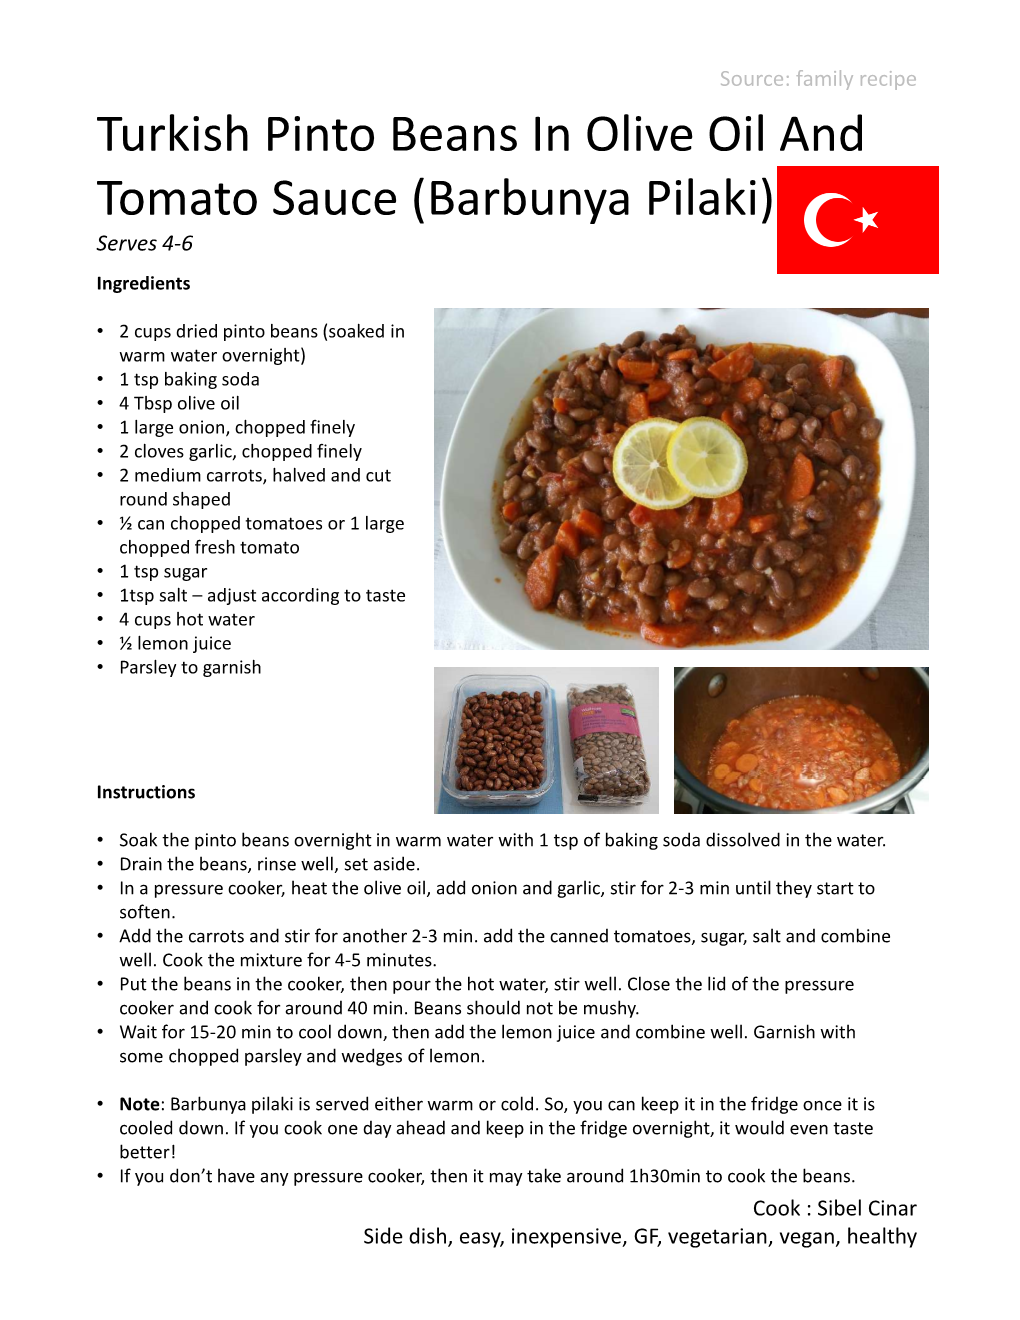 Turkish Pinto Beans in Olive Oil and Tomato Sauce (Barbunya Pilaki) Serves 4-6